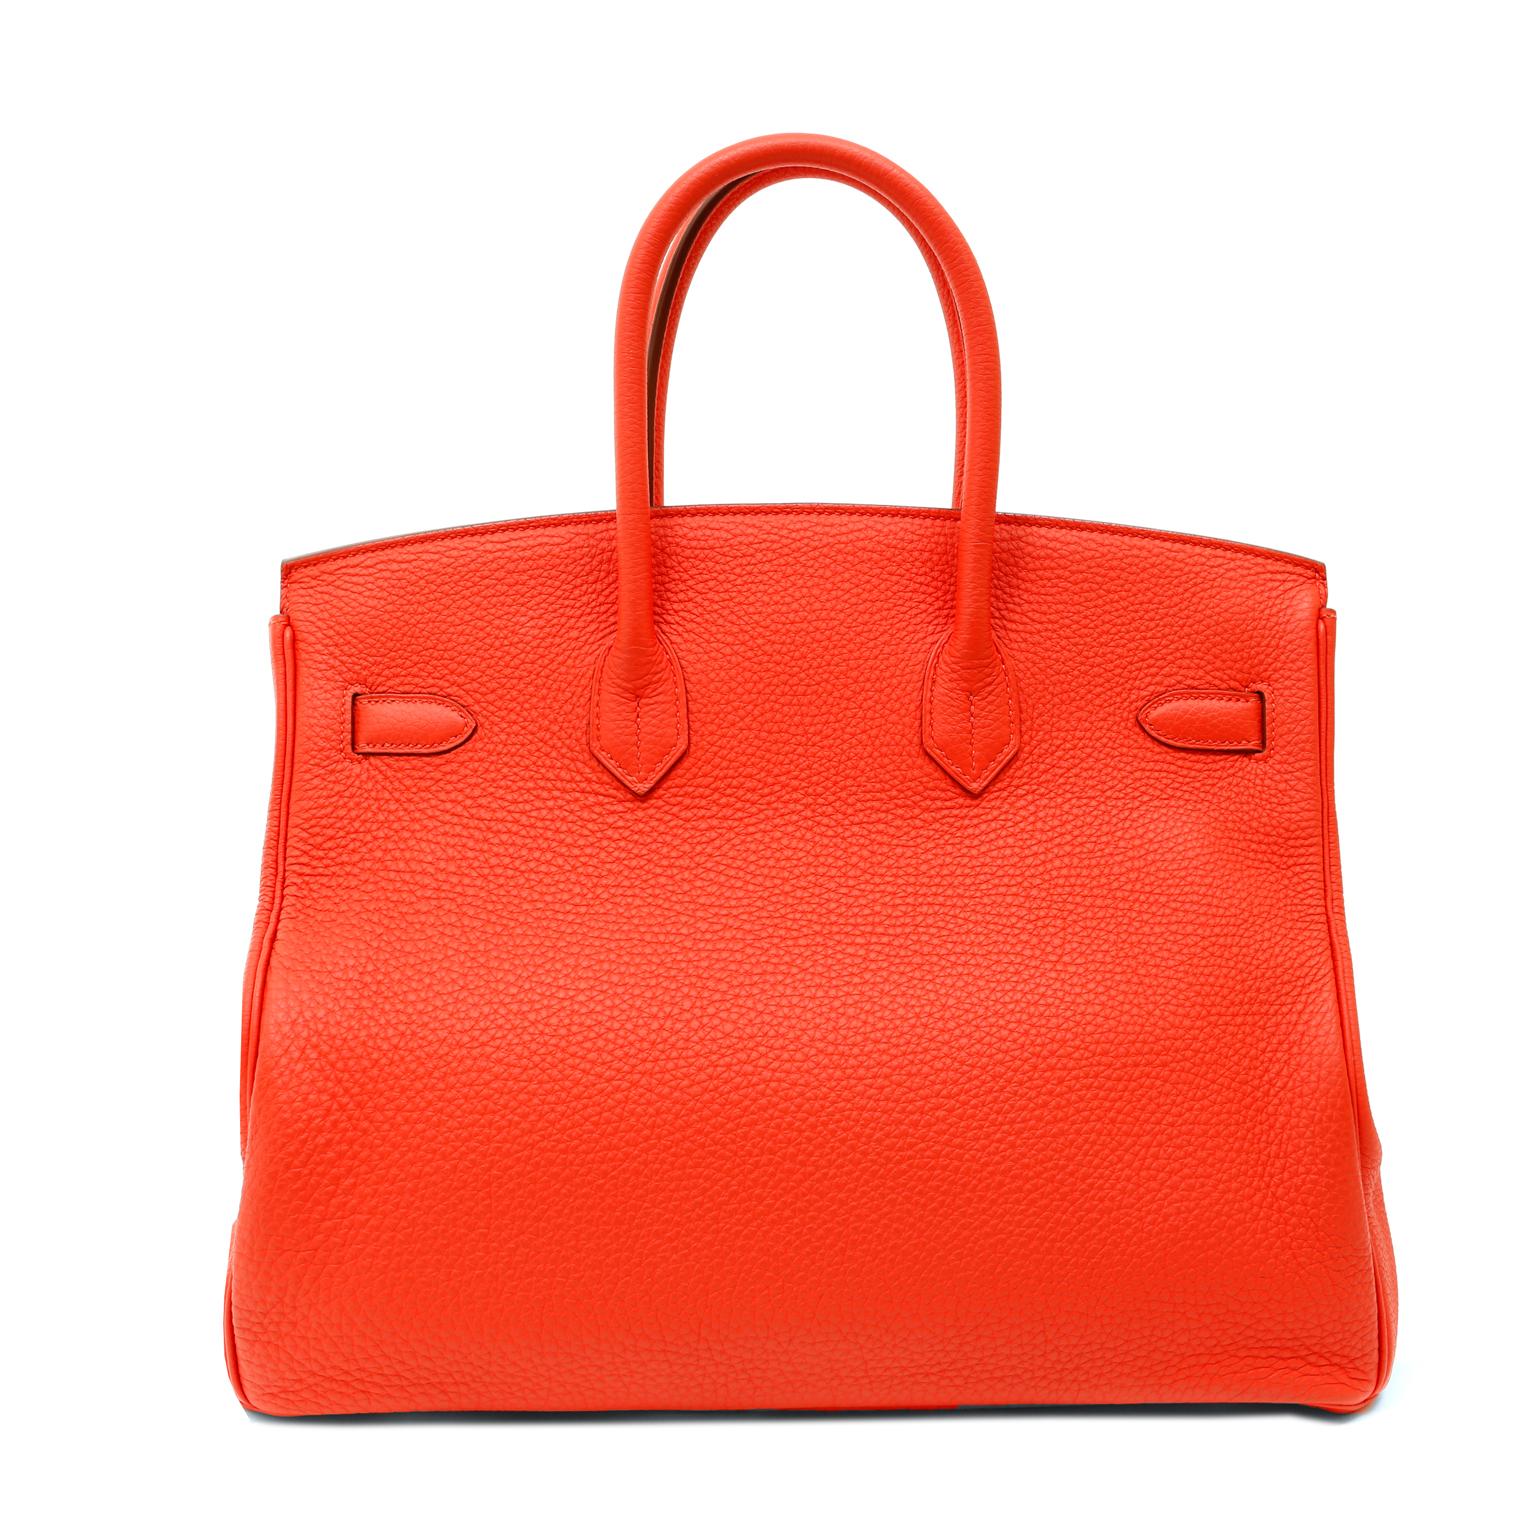 This authentic Hermès Rouge Jaipur Clemence 35cm Birkin is in excellent condition.  Hand stitched by skilled craftsmen, wait lists of a year or more are commonplace for the intensely coveted Hermès Birkin.  This brilliant bright cherry is a must